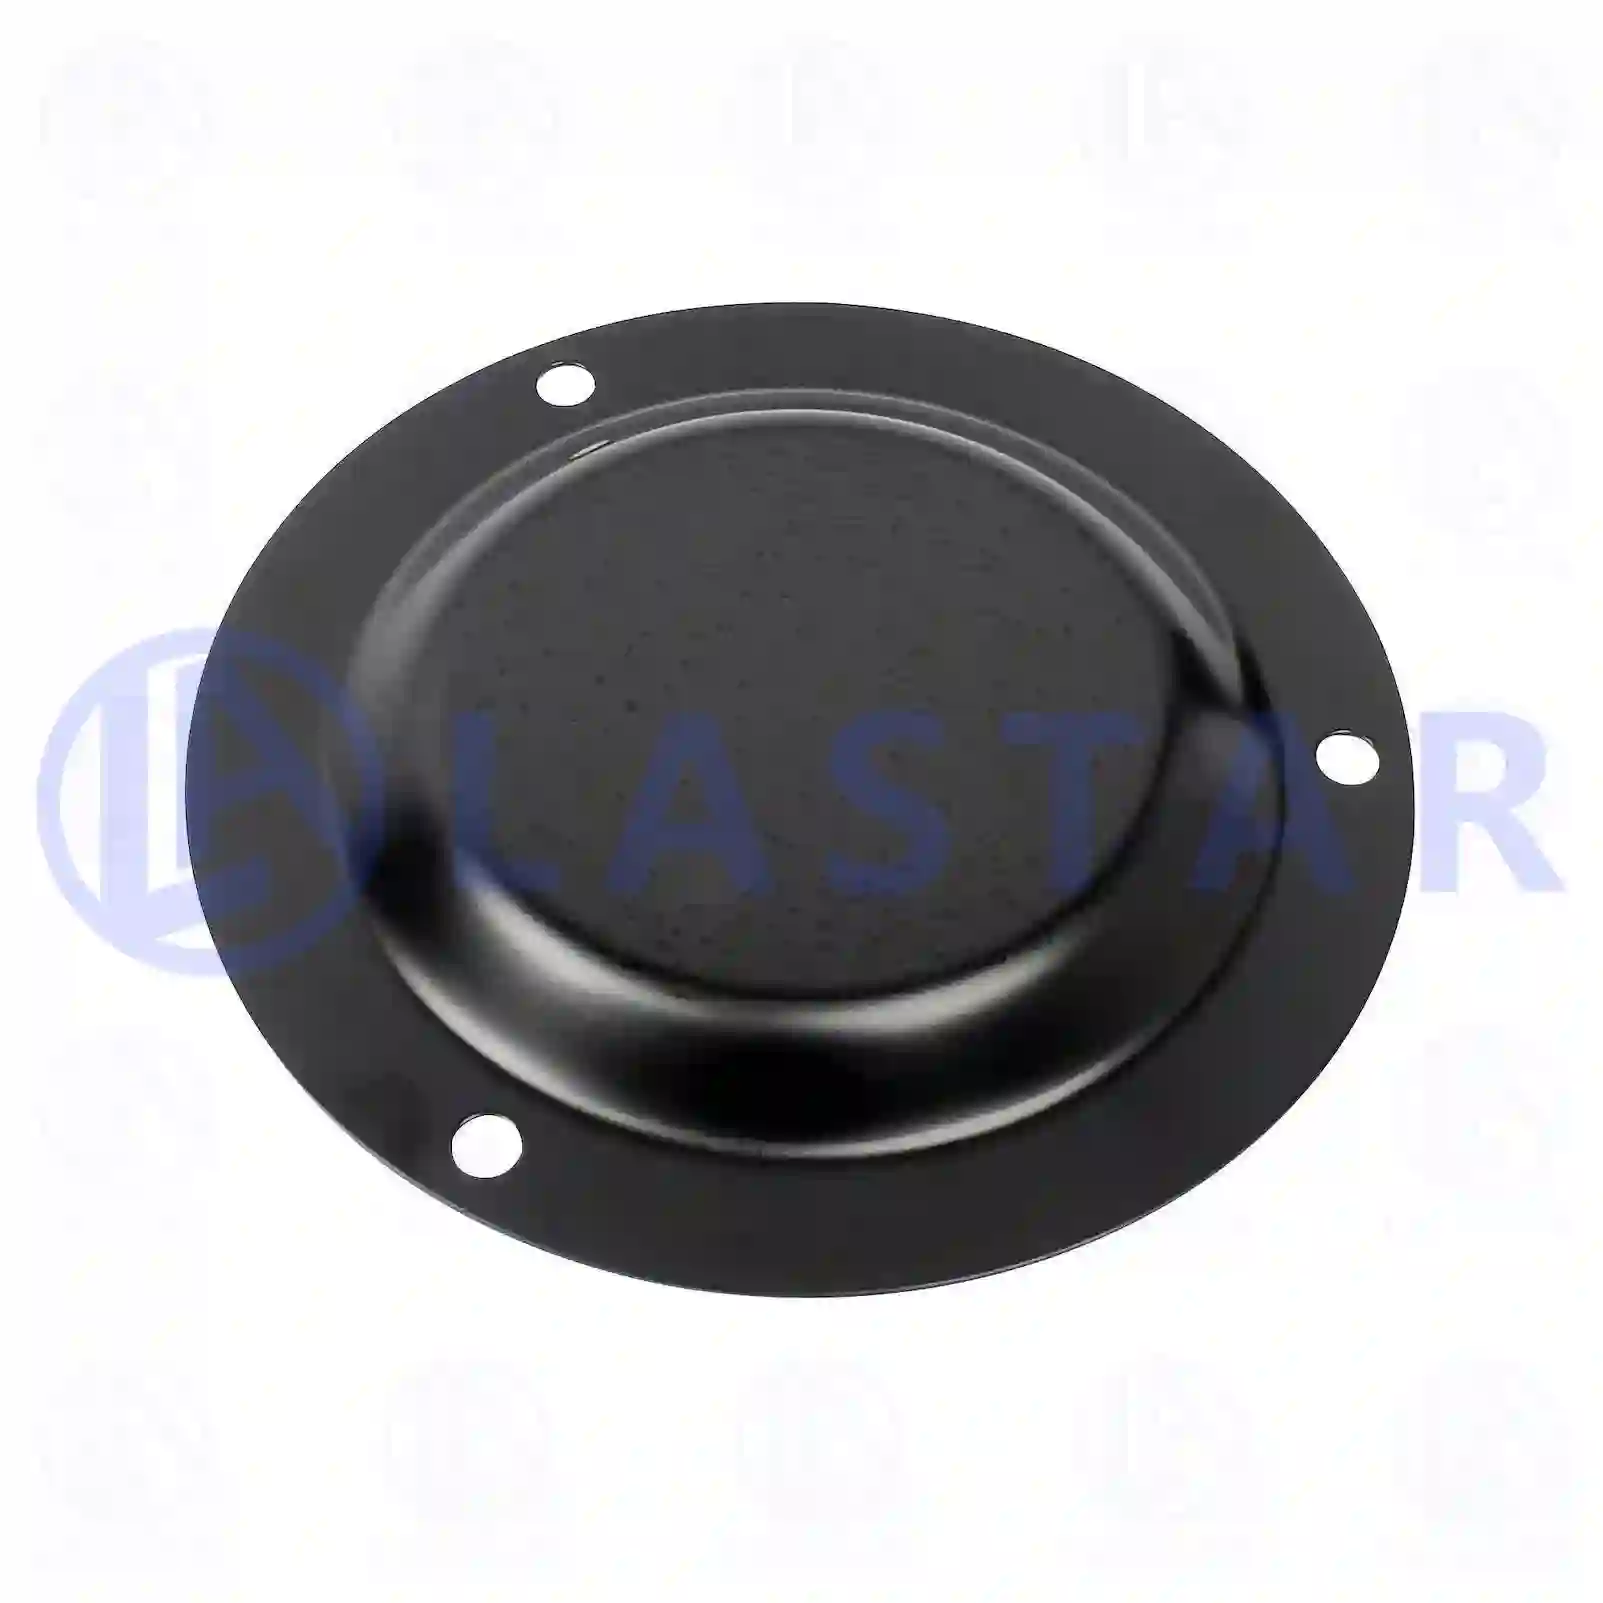 Cover, spring saddle, 77727838, 9473250013 ||  77727838 Lastar Spare Part | Truck Spare Parts, Auotomotive Spare Parts Cover, spring saddle, 77727838, 9473250013 ||  77727838 Lastar Spare Part | Truck Spare Parts, Auotomotive Spare Parts